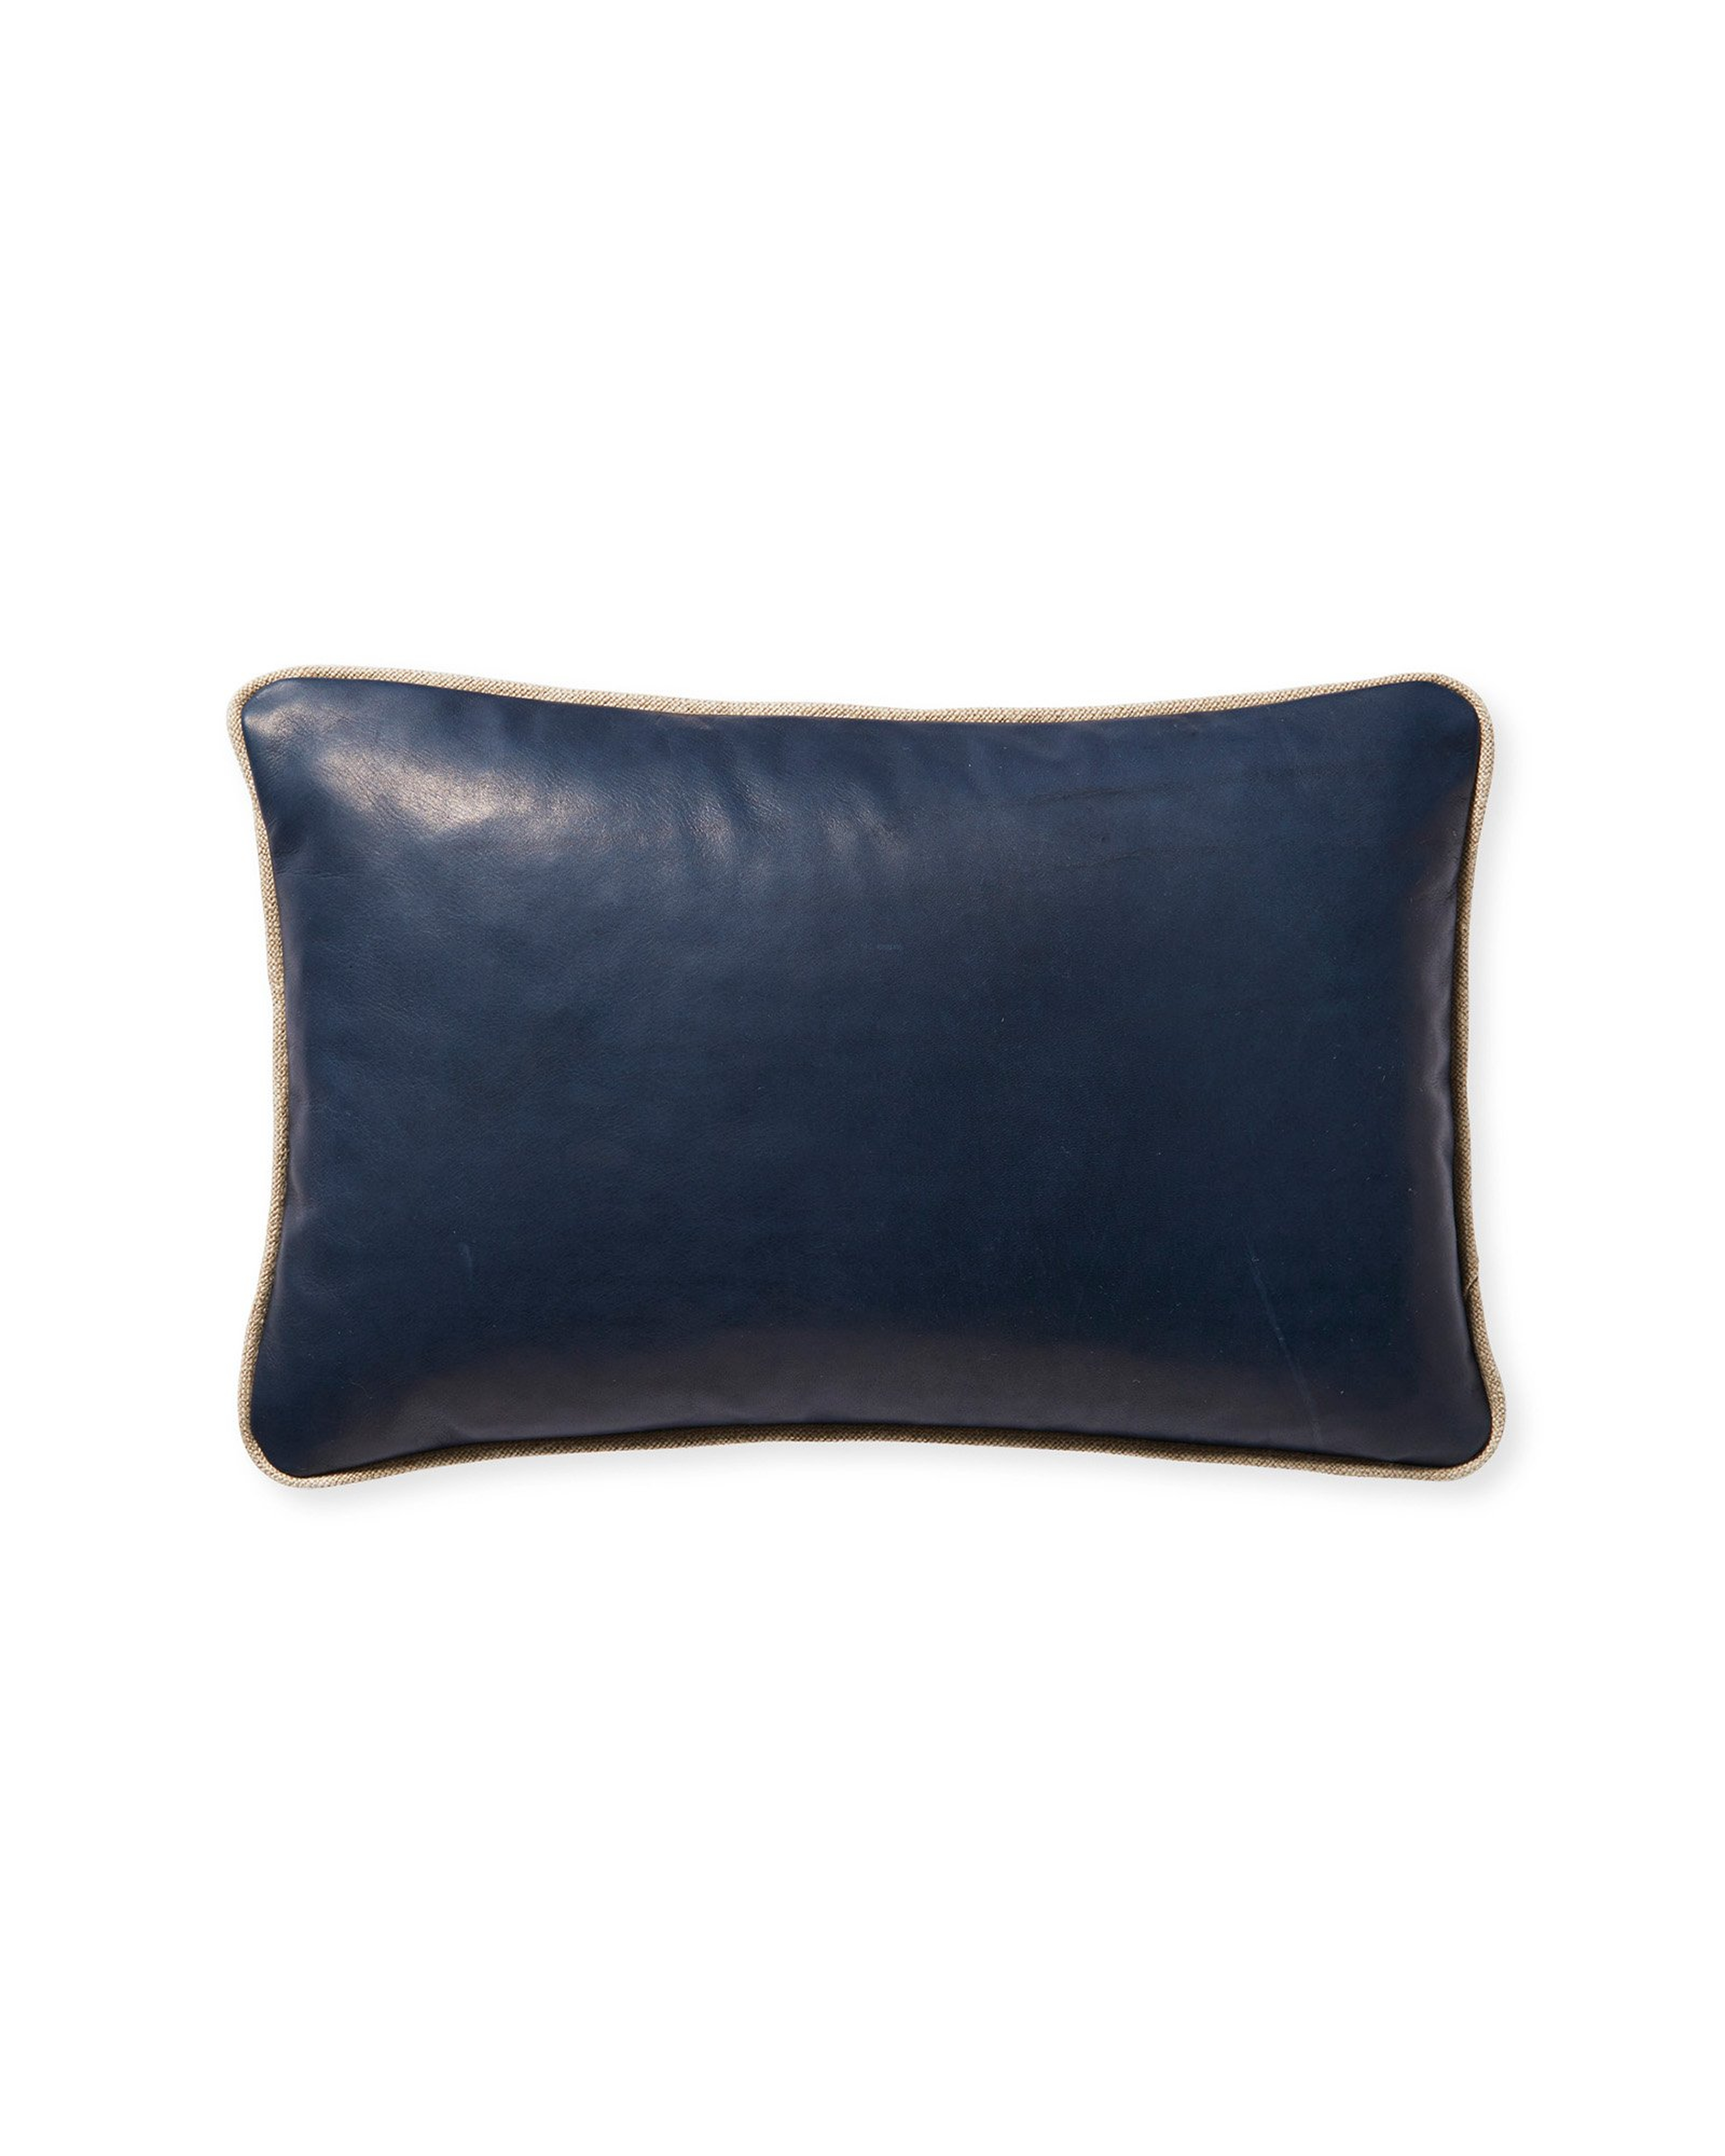 Leather 12" x 18" Pillow Cover - Midnight - Insert sold separately - Serena and Lily